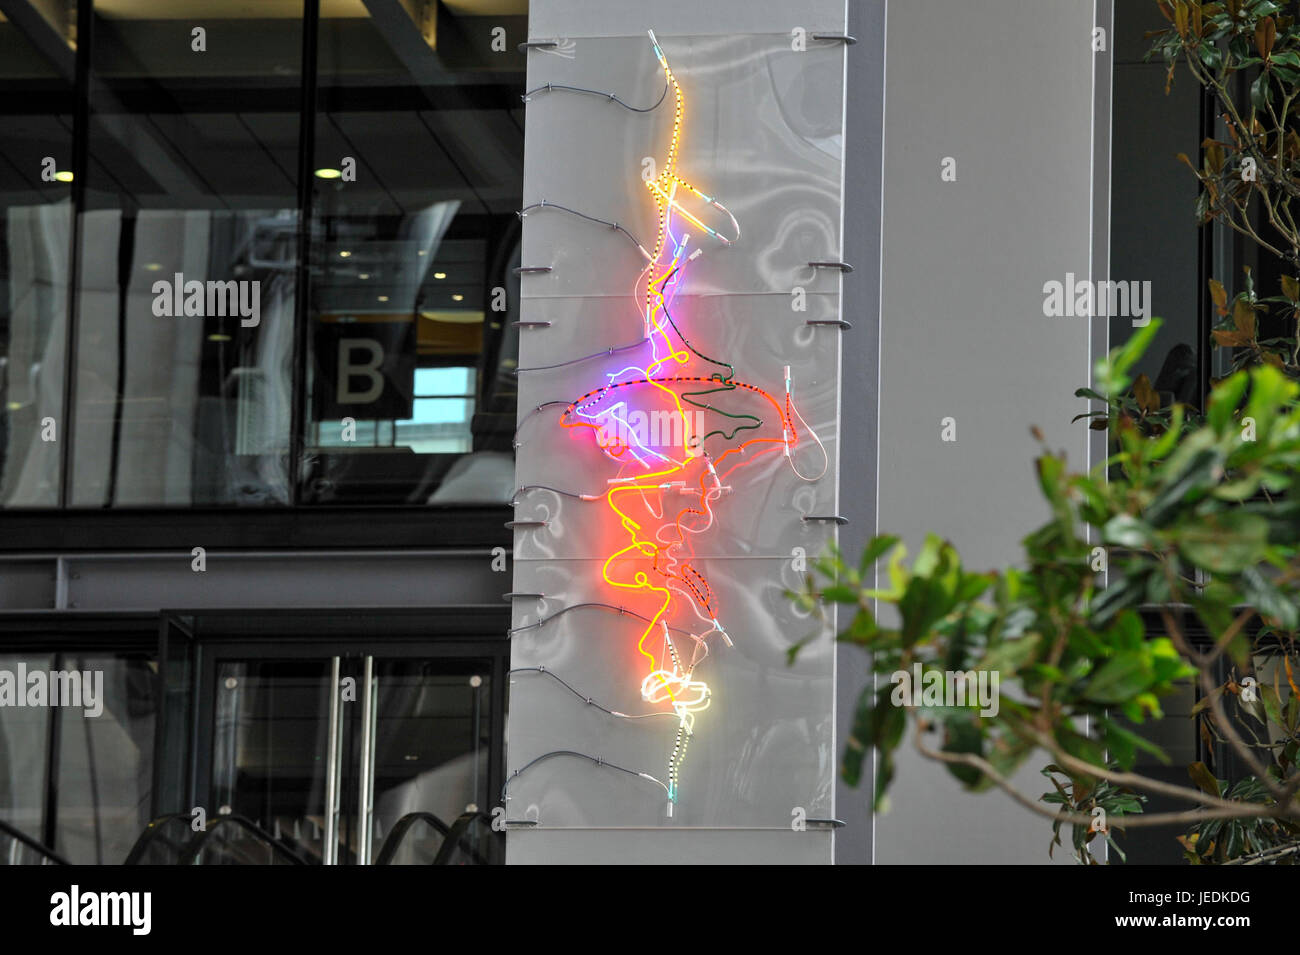 London, UK.  24 June 2017. "Tipping Point" by Kevin Killen, a neon and plastic sheet installation. The artwork is on display as part of "Sculpture in the City", a festival of sculpture in the Square Mile featuring 16 contemporary works by internationally renowned artists which begins on 27 June.   Credit: Stephen Chung / Alamy Live News Stock Photo